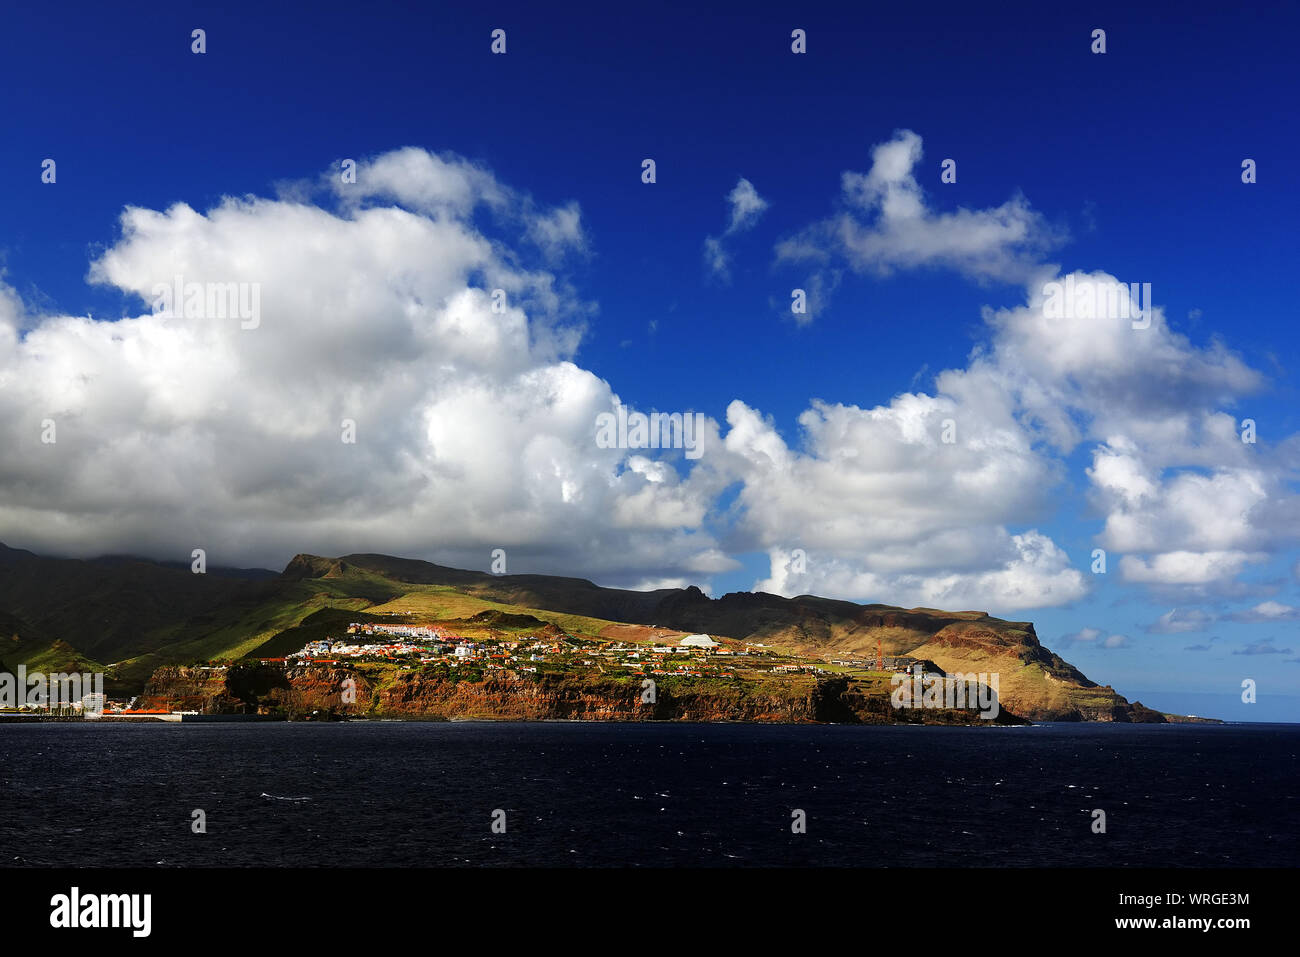 View Of Atlantic Ocean By Hill Against Cloudy Sky Stock Photo